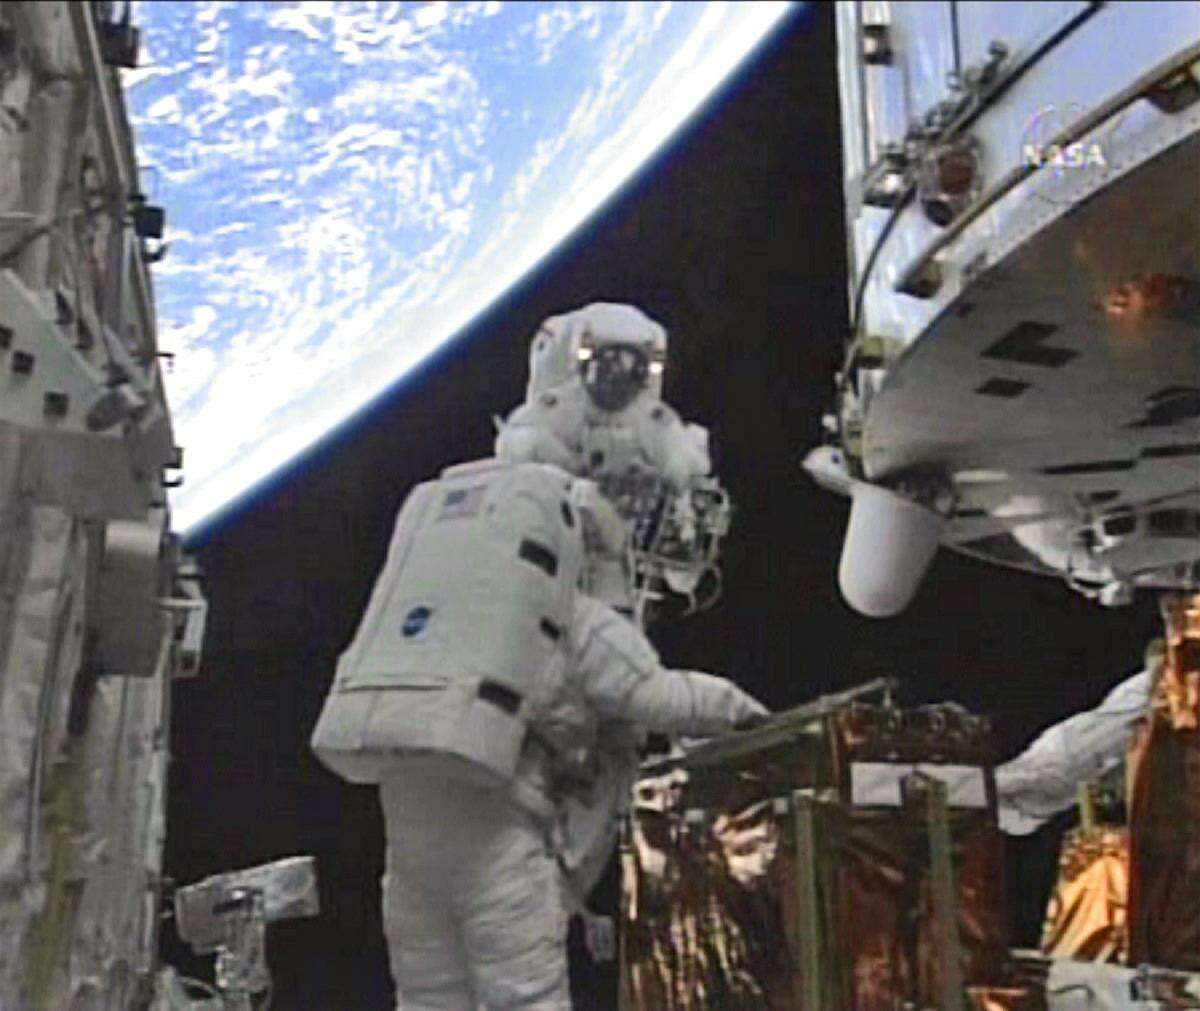 In this image from NASA TV with earth in the background, astronauts John Grunsfeld, rear, and Andrew Feustel work to upgrade the Hubble Space Telescope during a spacewalk on May 18, 2009. This was the fifth and final repair mission for what was then a 19-year-old telescope.